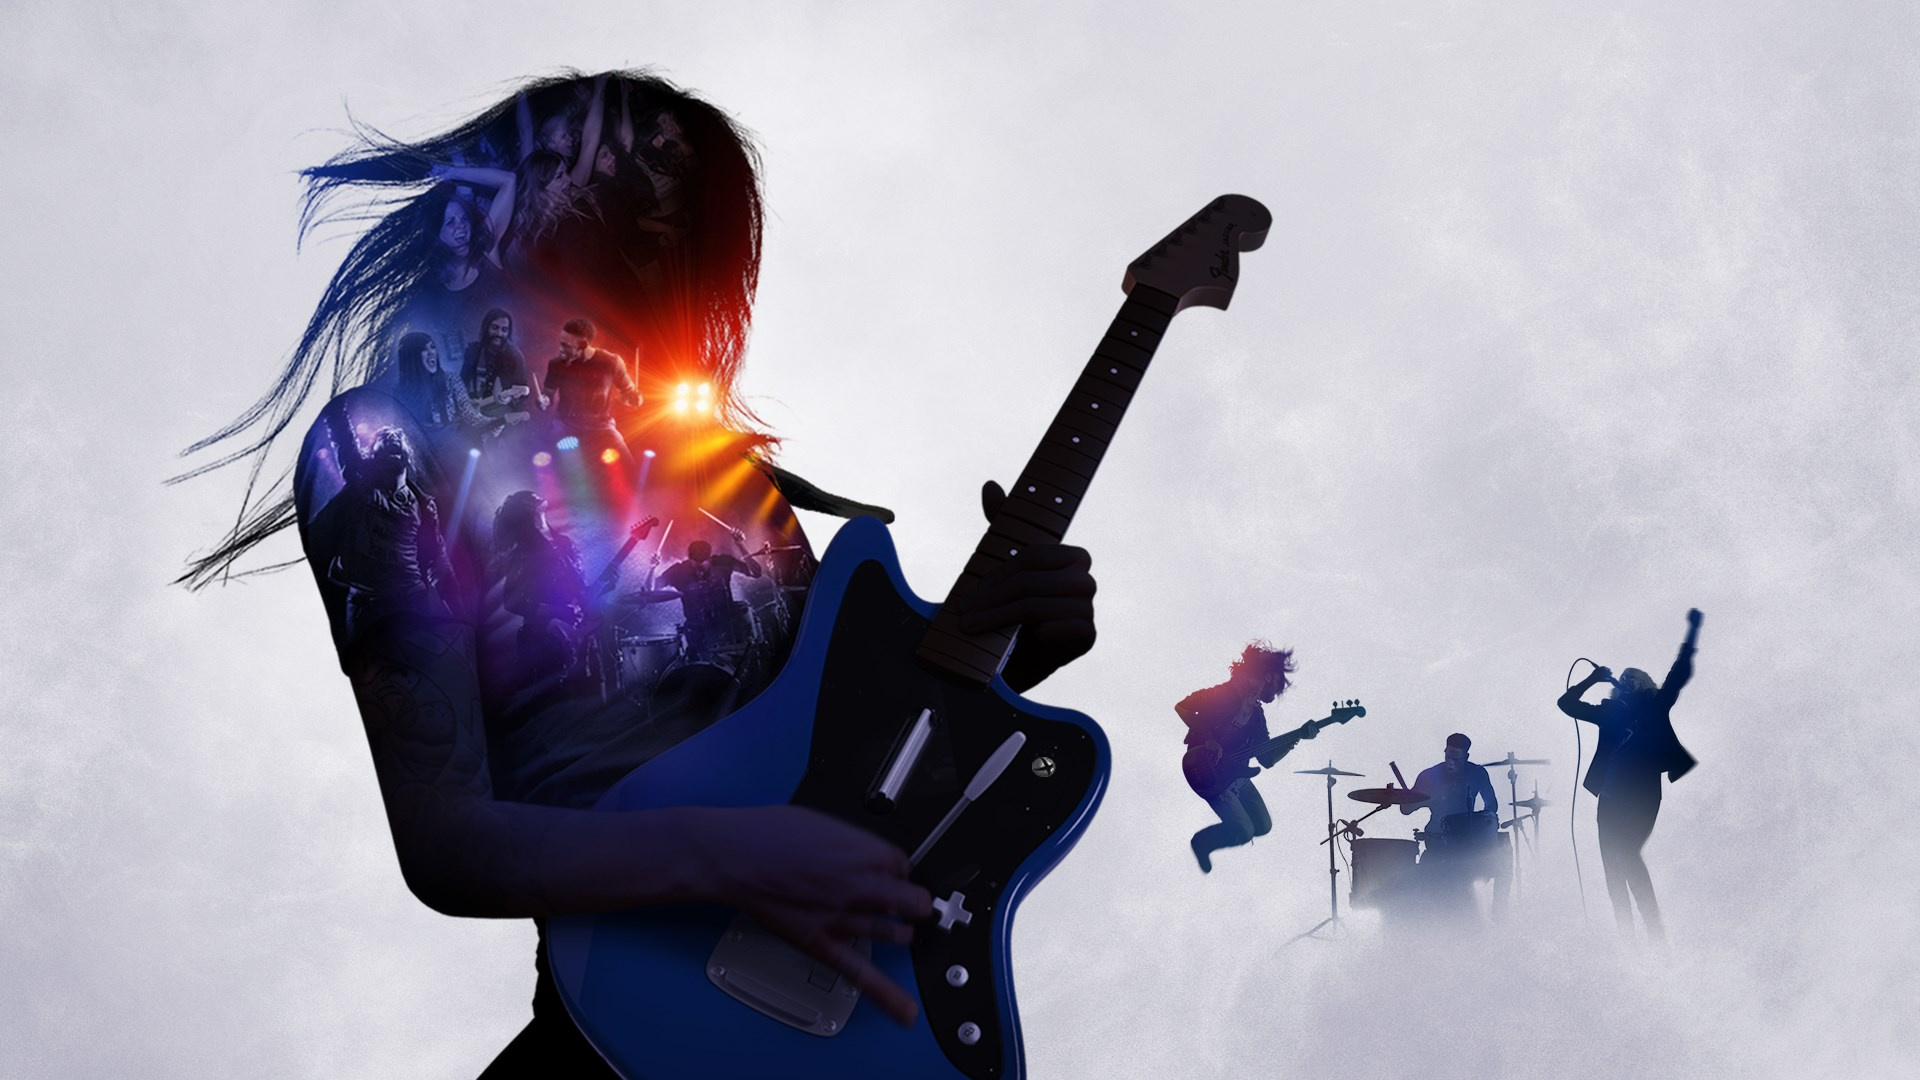 Random Rock Band 4 Guitars And Accessories Are Selling For